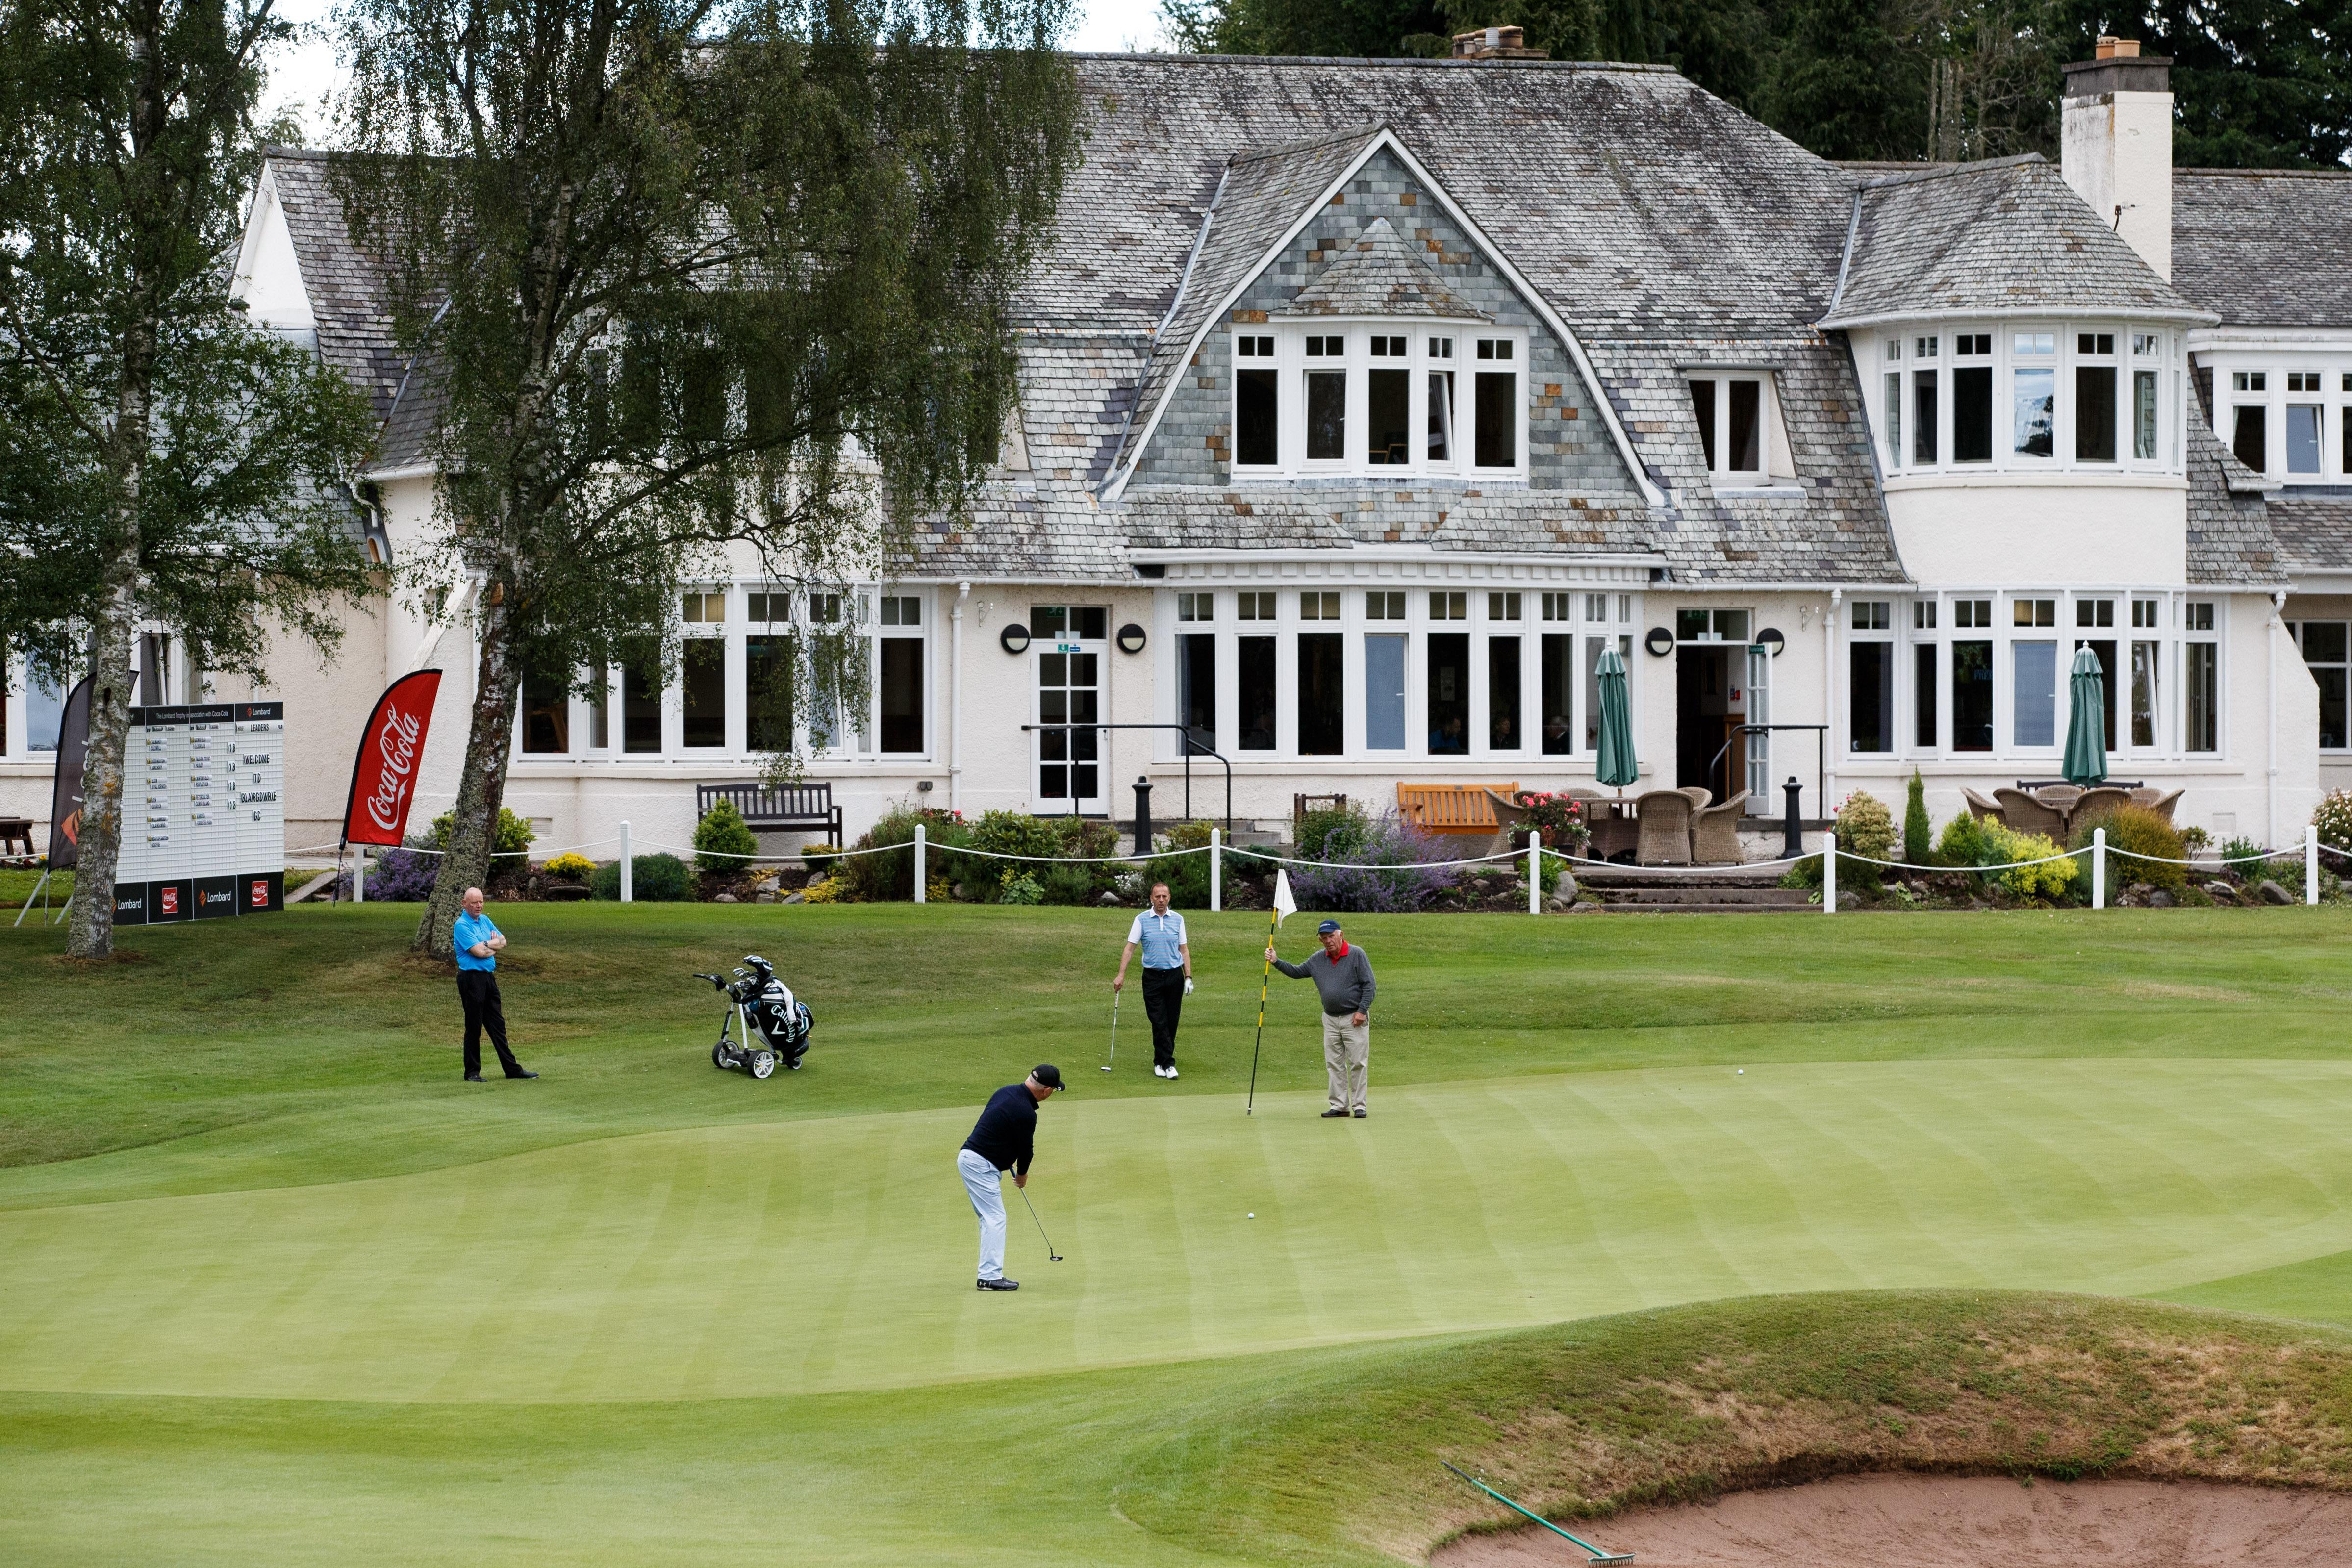 Four men stand on a putting green, a large club house stands in the background.